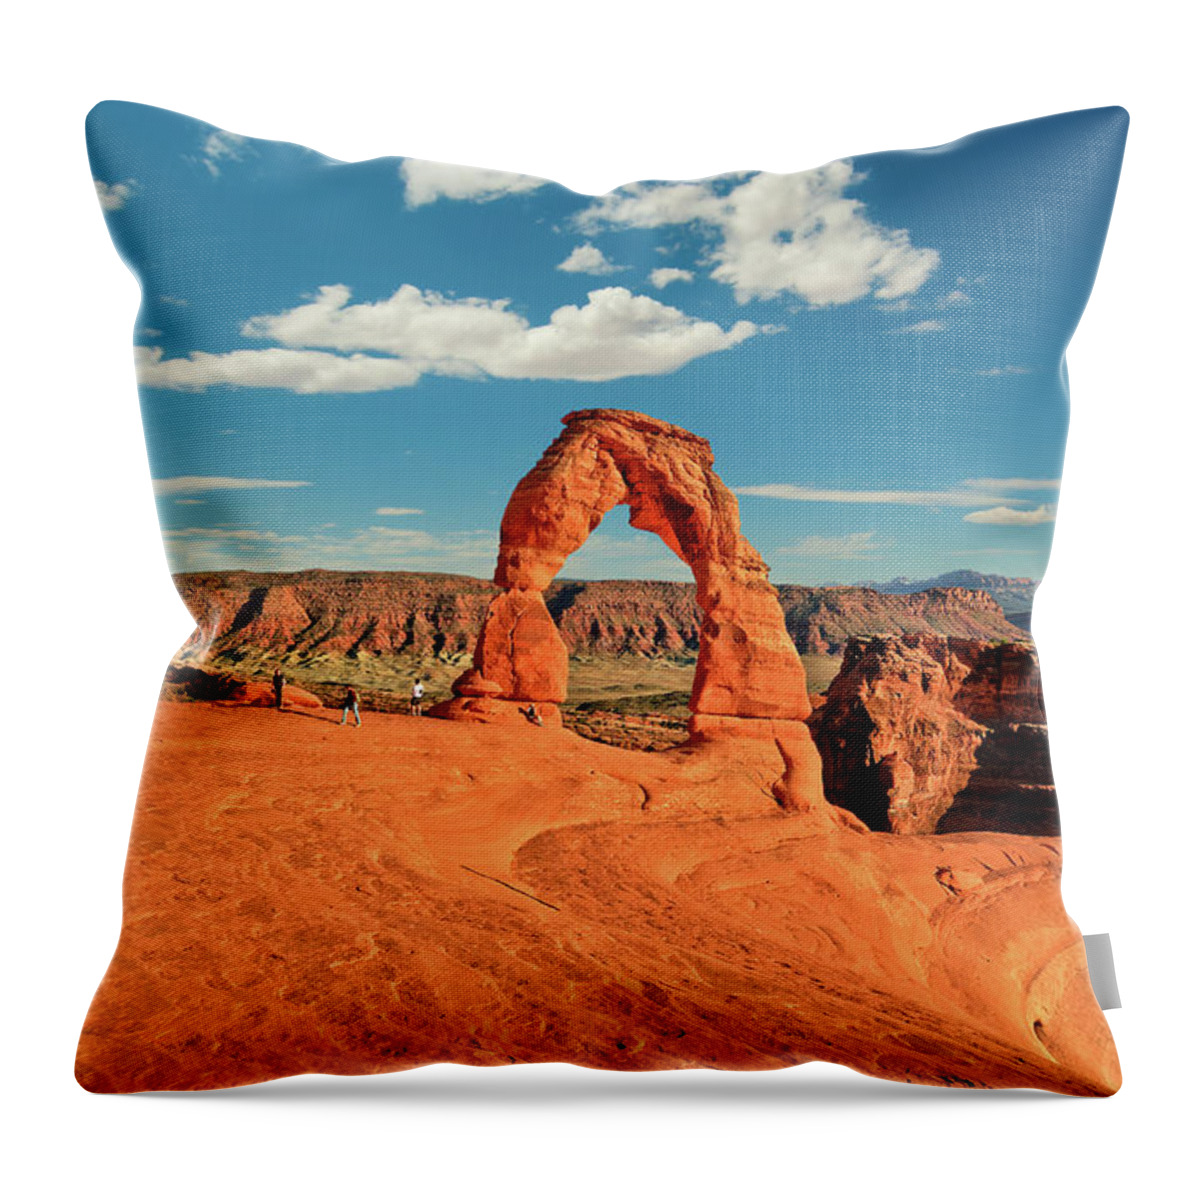 Extreme Terrain Throw Pillow featuring the photograph Arches National Park - Utah by Www.35mmnegative.com